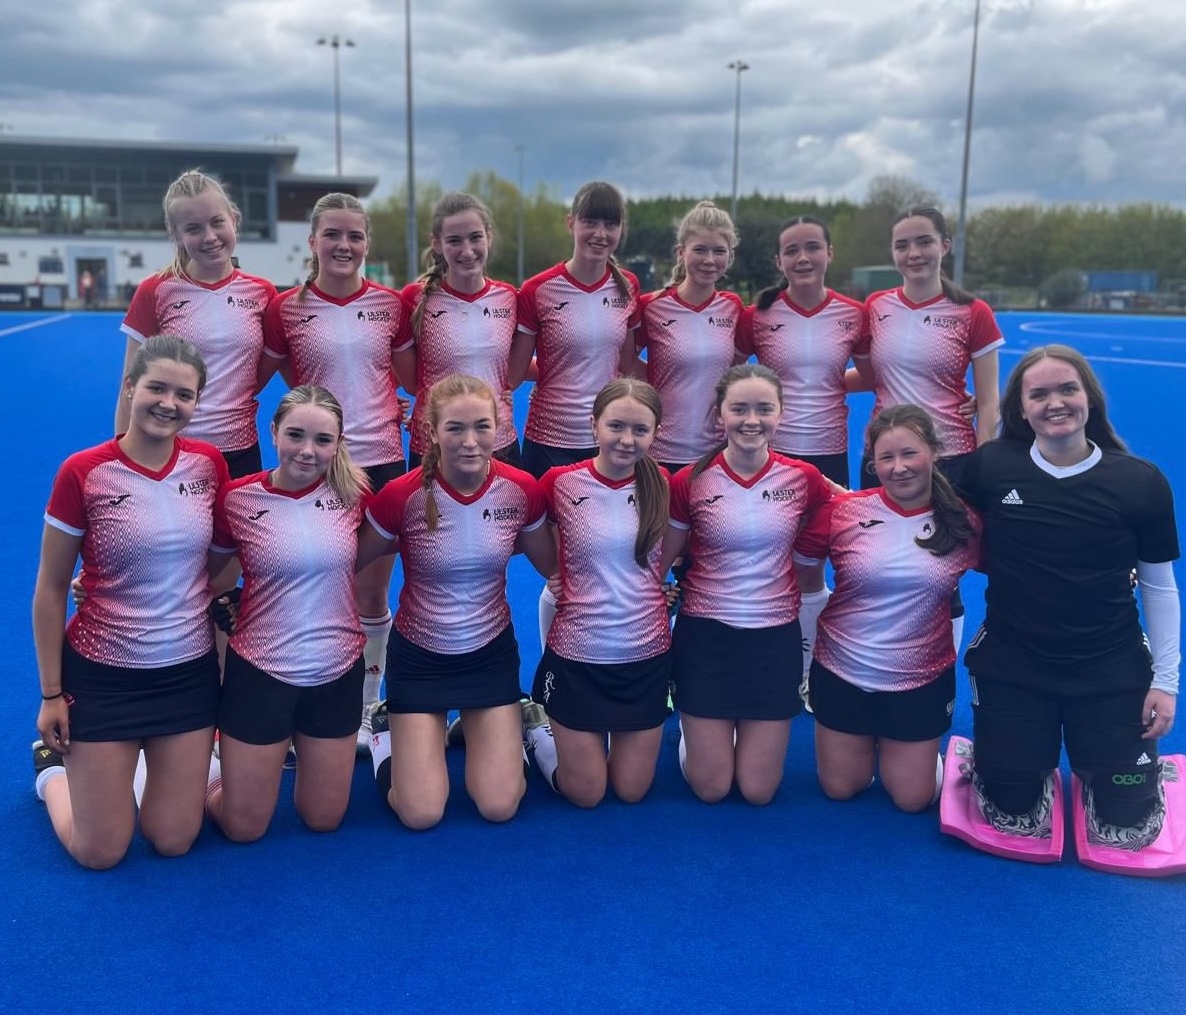 Over the weekend a series of Ulster U17 squads played against teams from Leinster and Leinster South as well as an U16 Irish Regional Squad at Lisnagarvey Hockey Club🏑 Well done to all involved👏